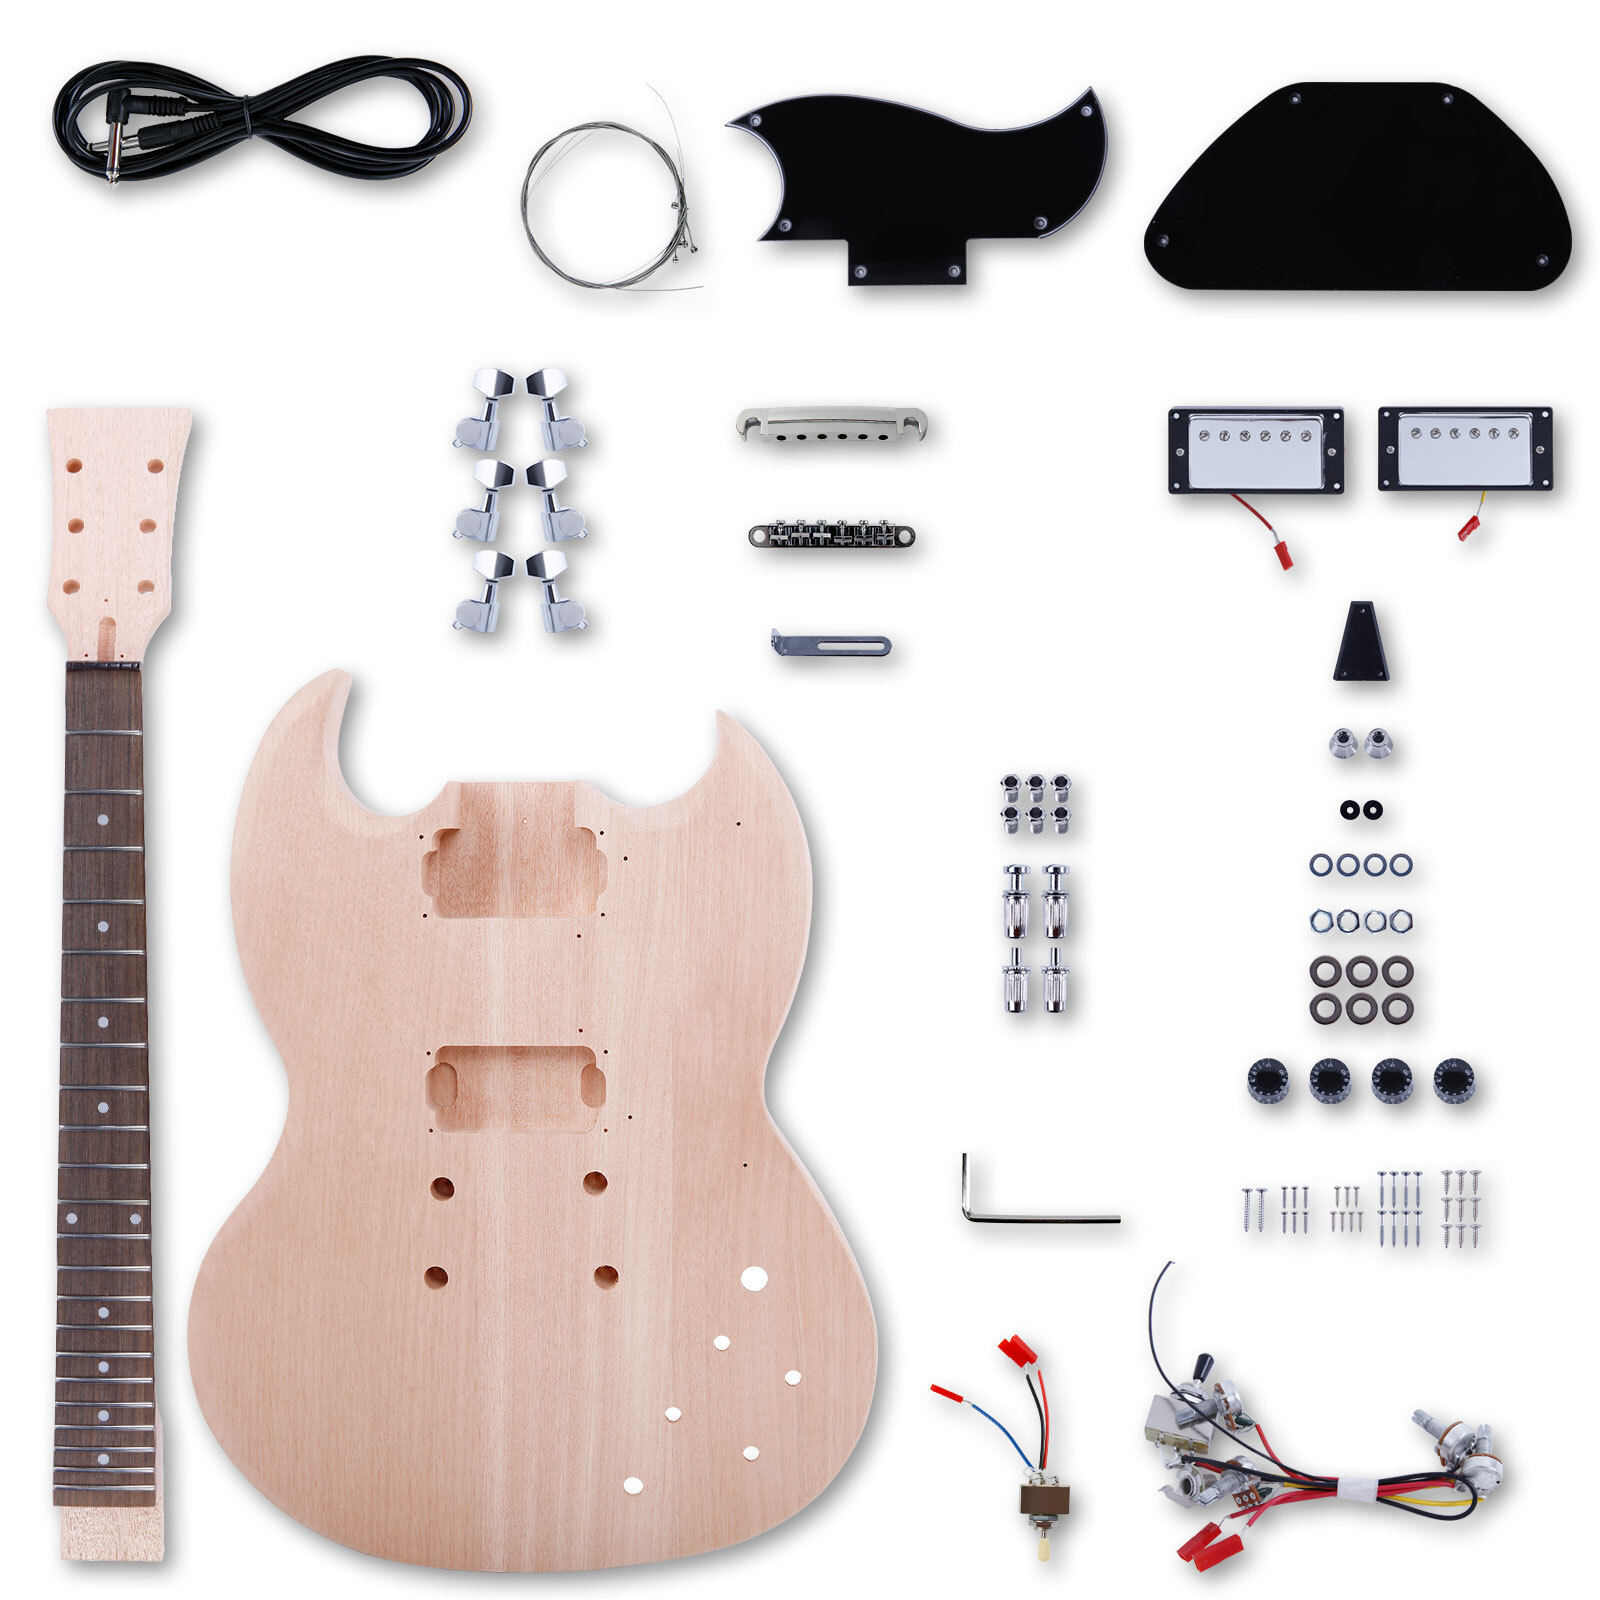 Berygtet Hej hej ildsted Leo Jaymz DIY Electric Guitar Kits with Mahogany Body and Neck - Rosewood  Fingerboard and All Components Included (SG)